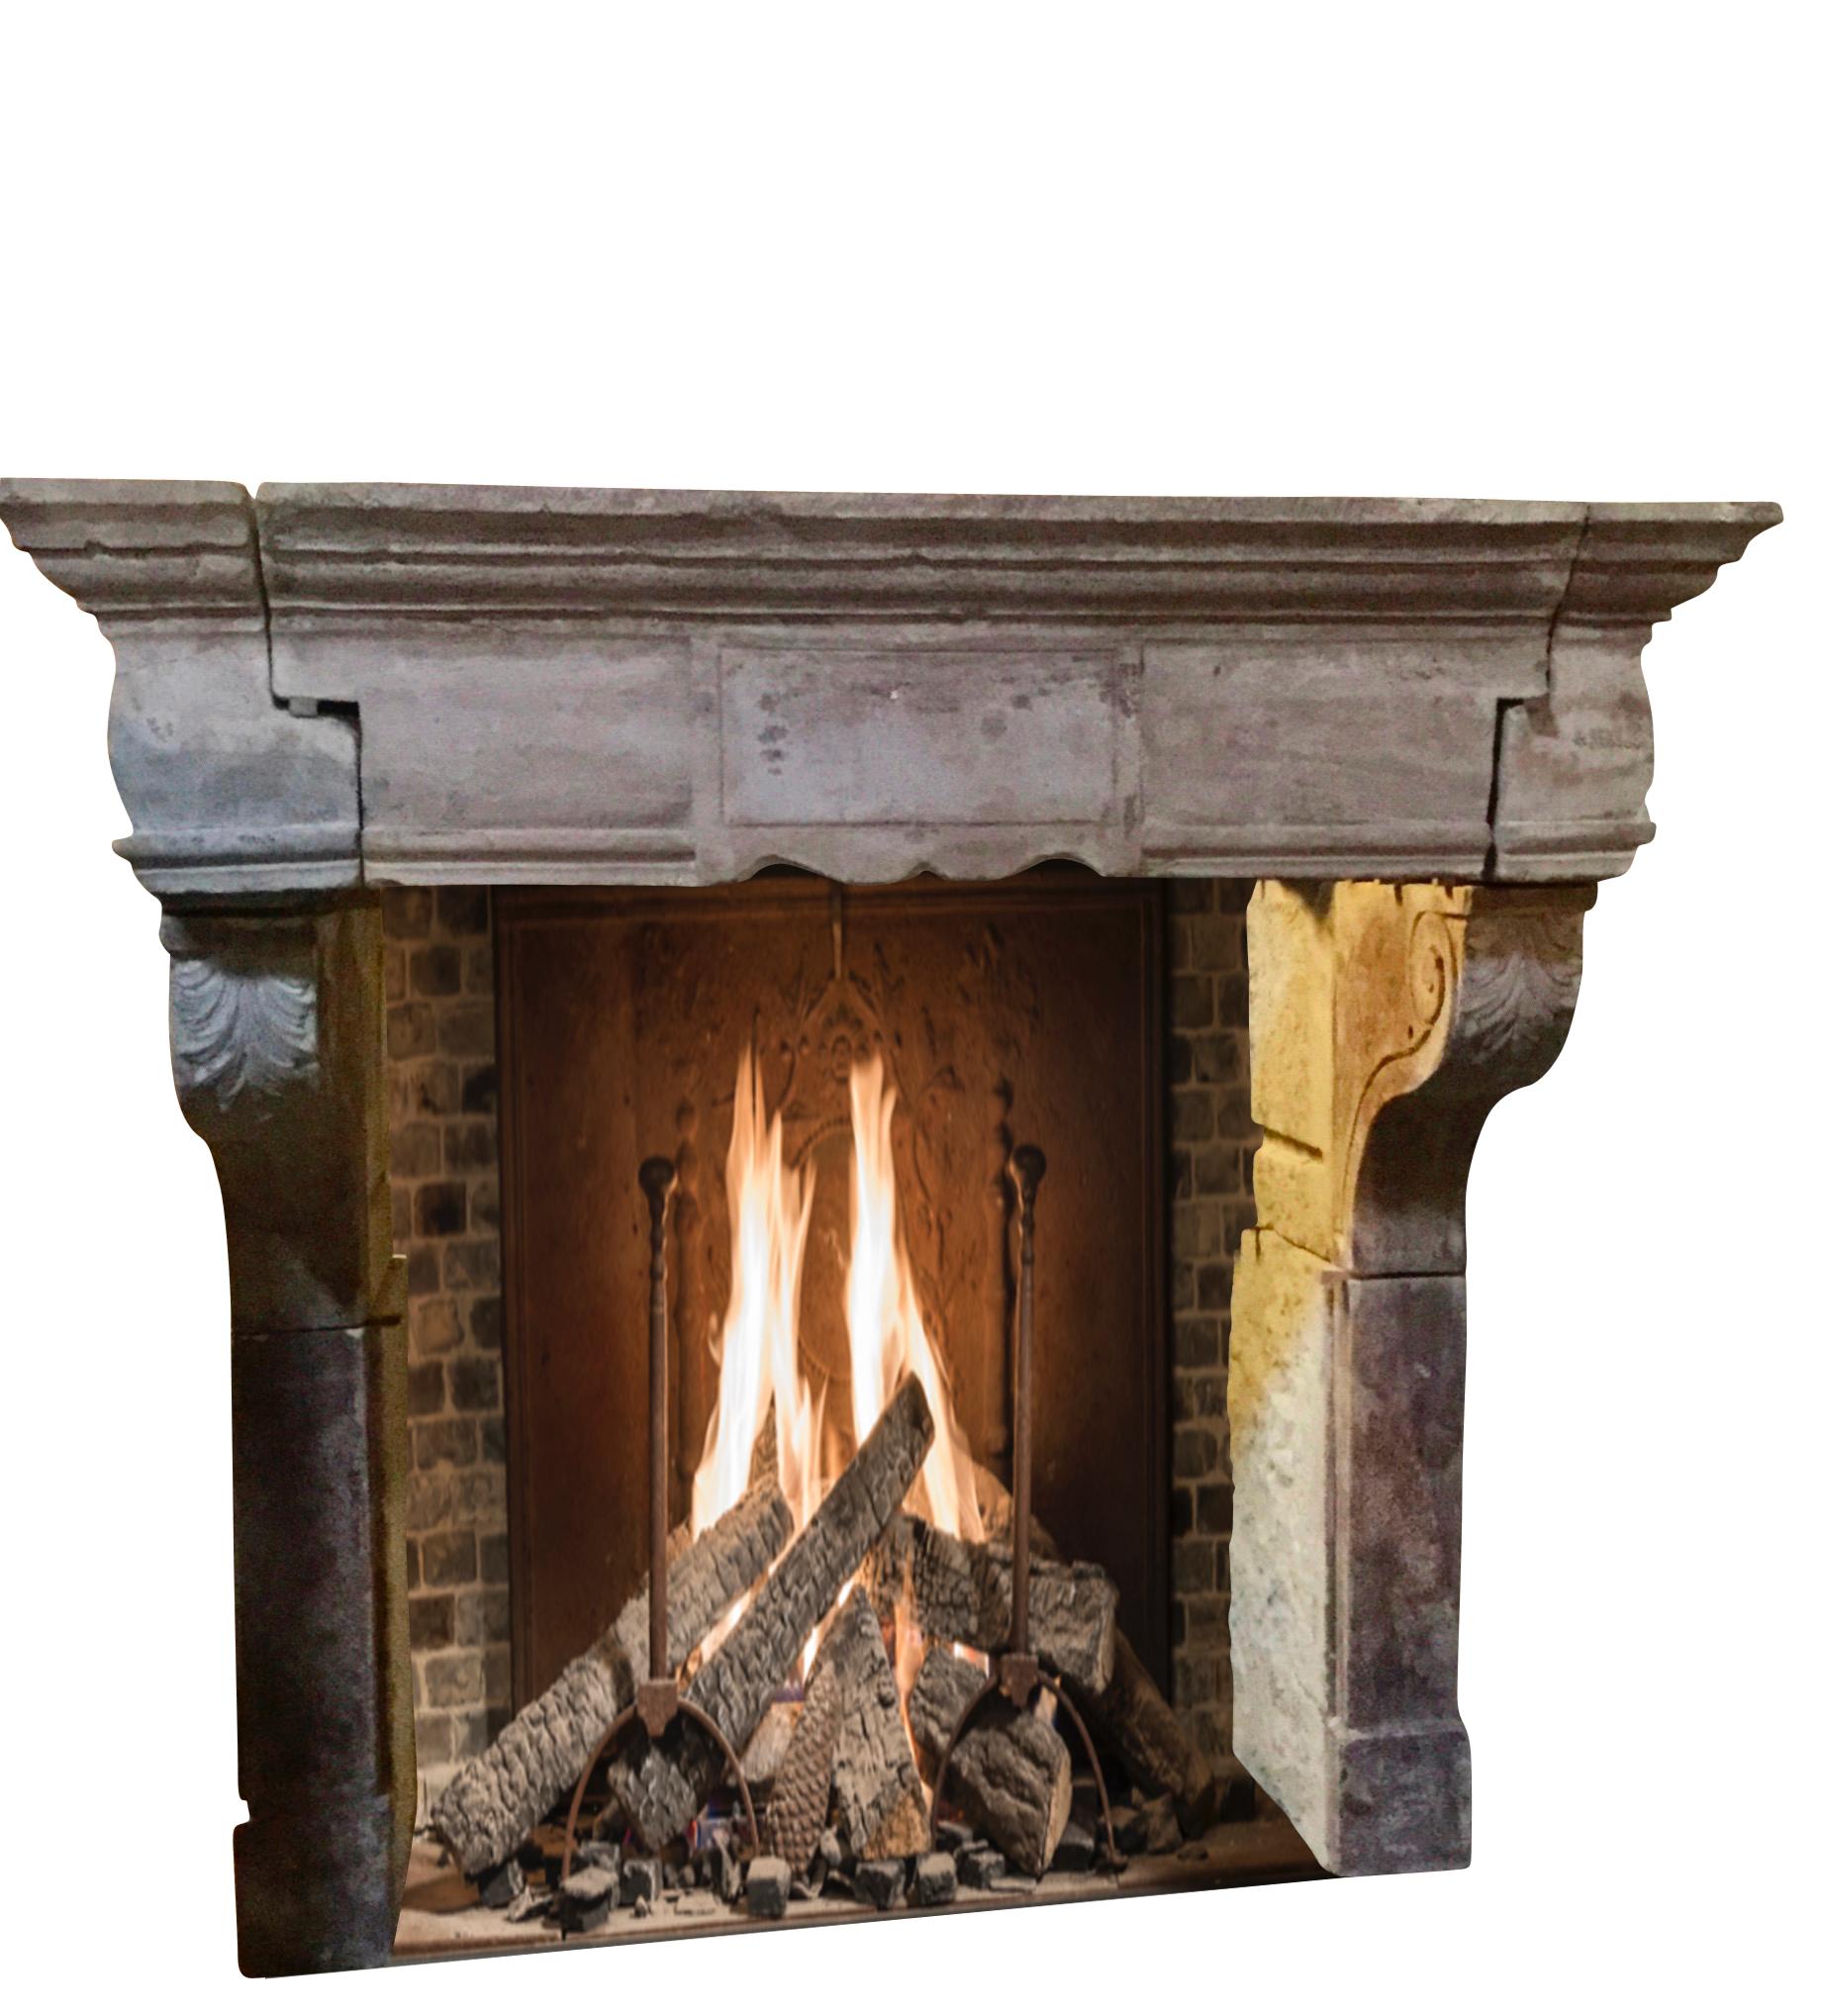 Limestone 16th Century French Country Renaissance Period Fireplace Surround